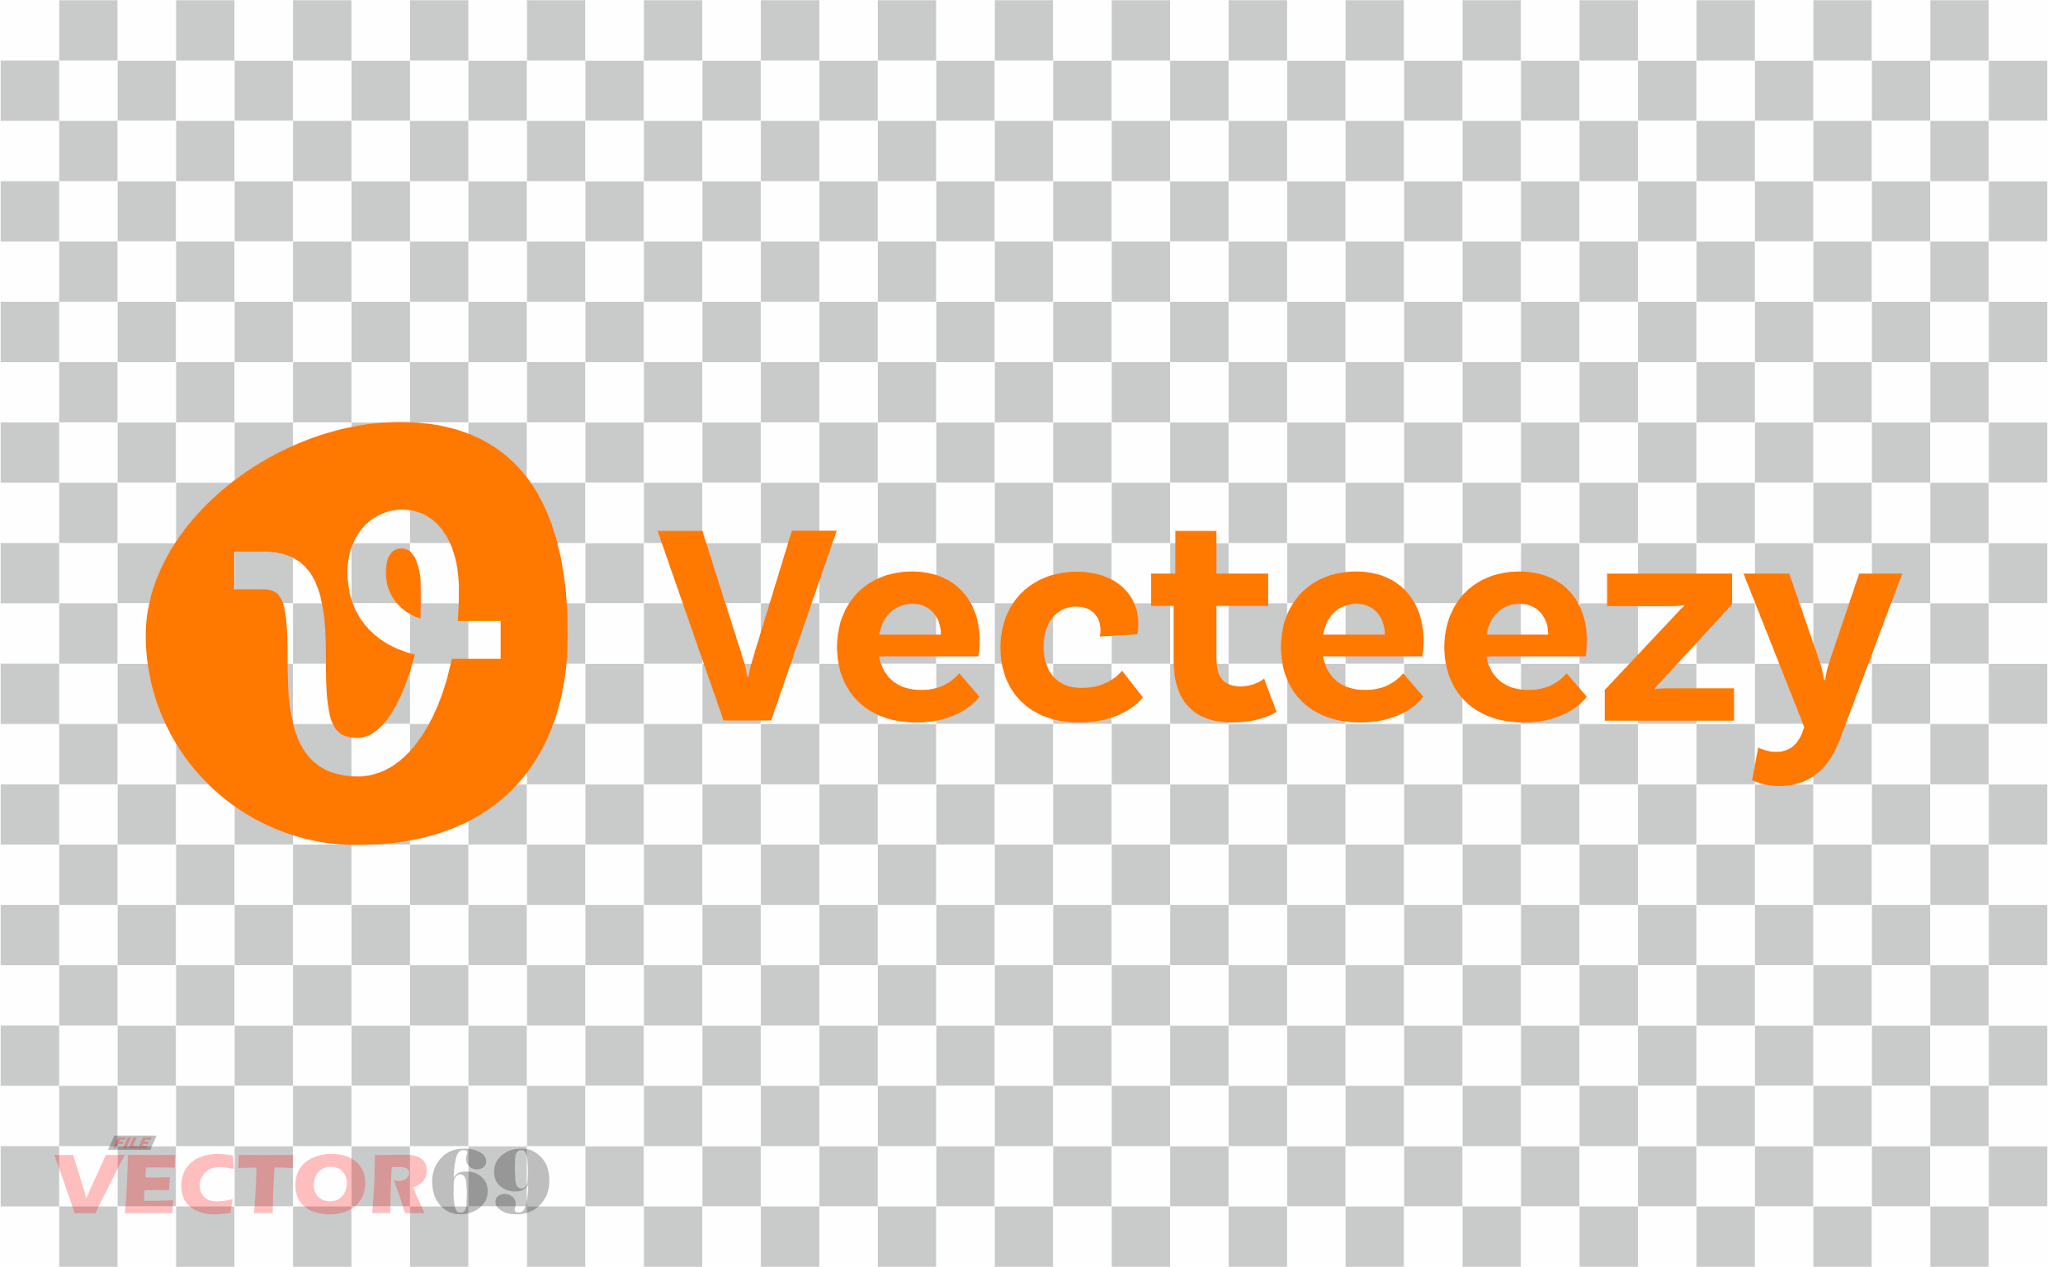 Vecteezy New 2020 Logo - Download Vector File PNG (Portable Network Graphics)